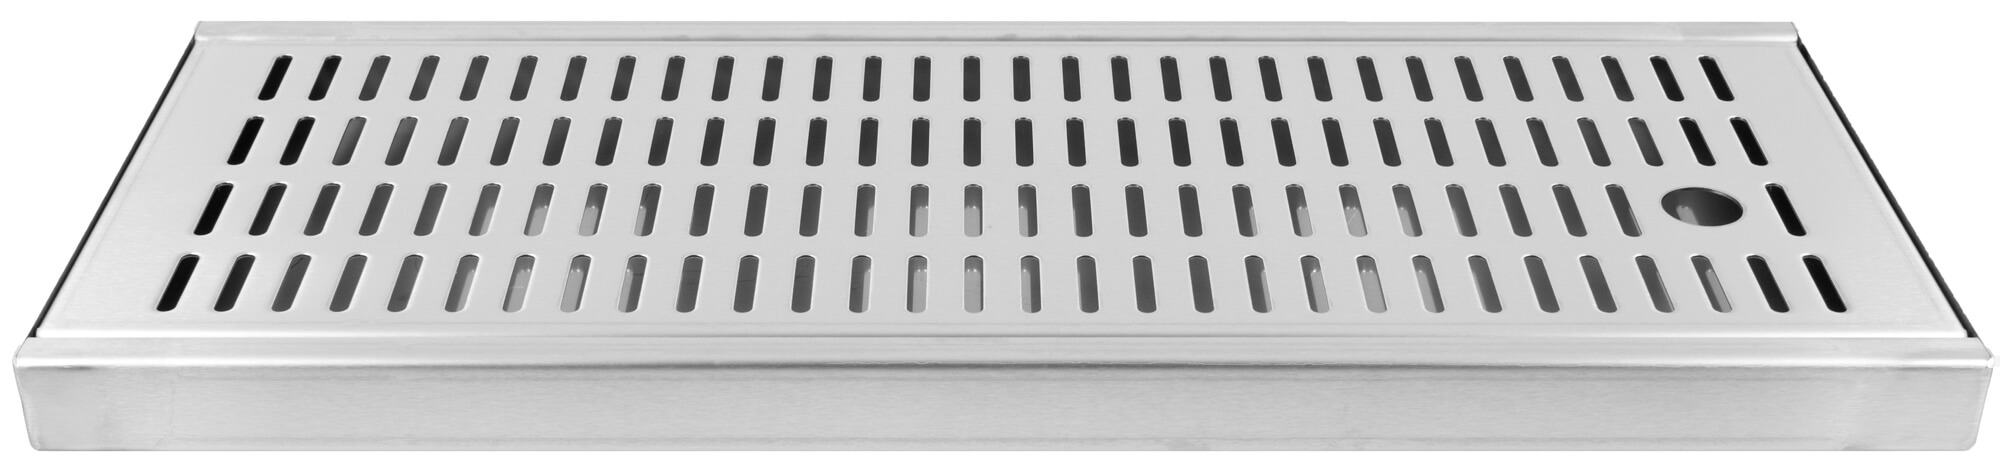 Drip Tray long (20x50x3cm) - stainless steel